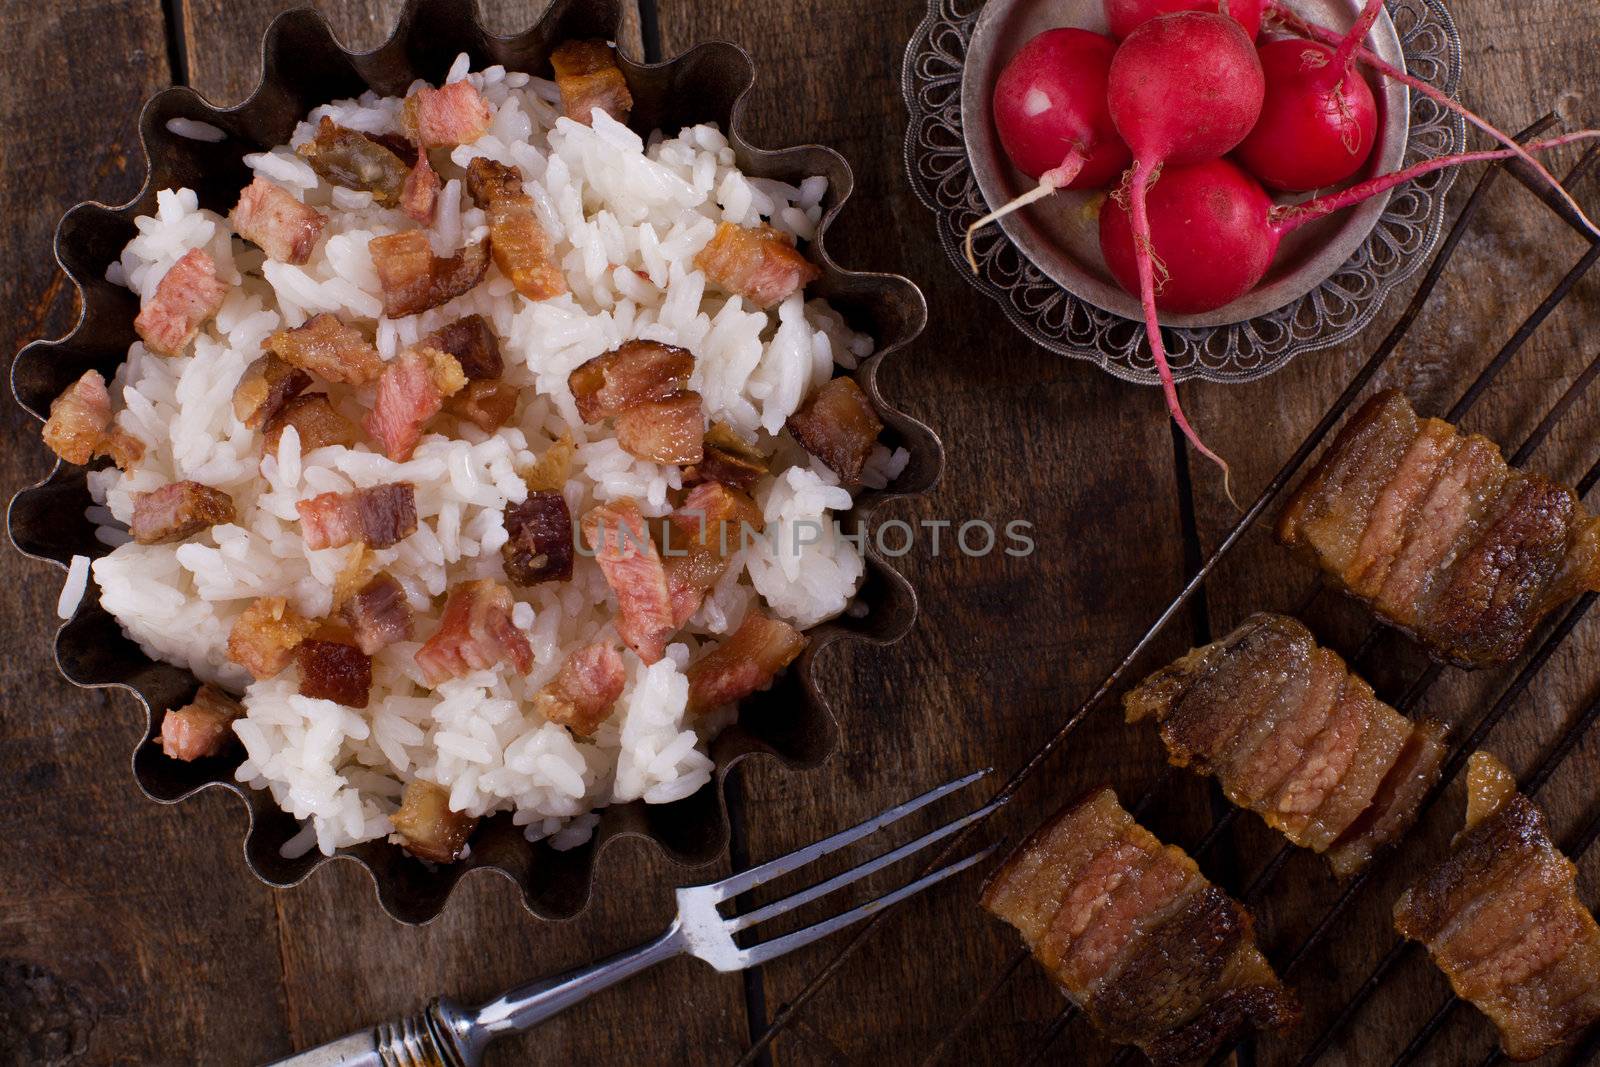 Boiled rice with meat and radish by IuraAtom